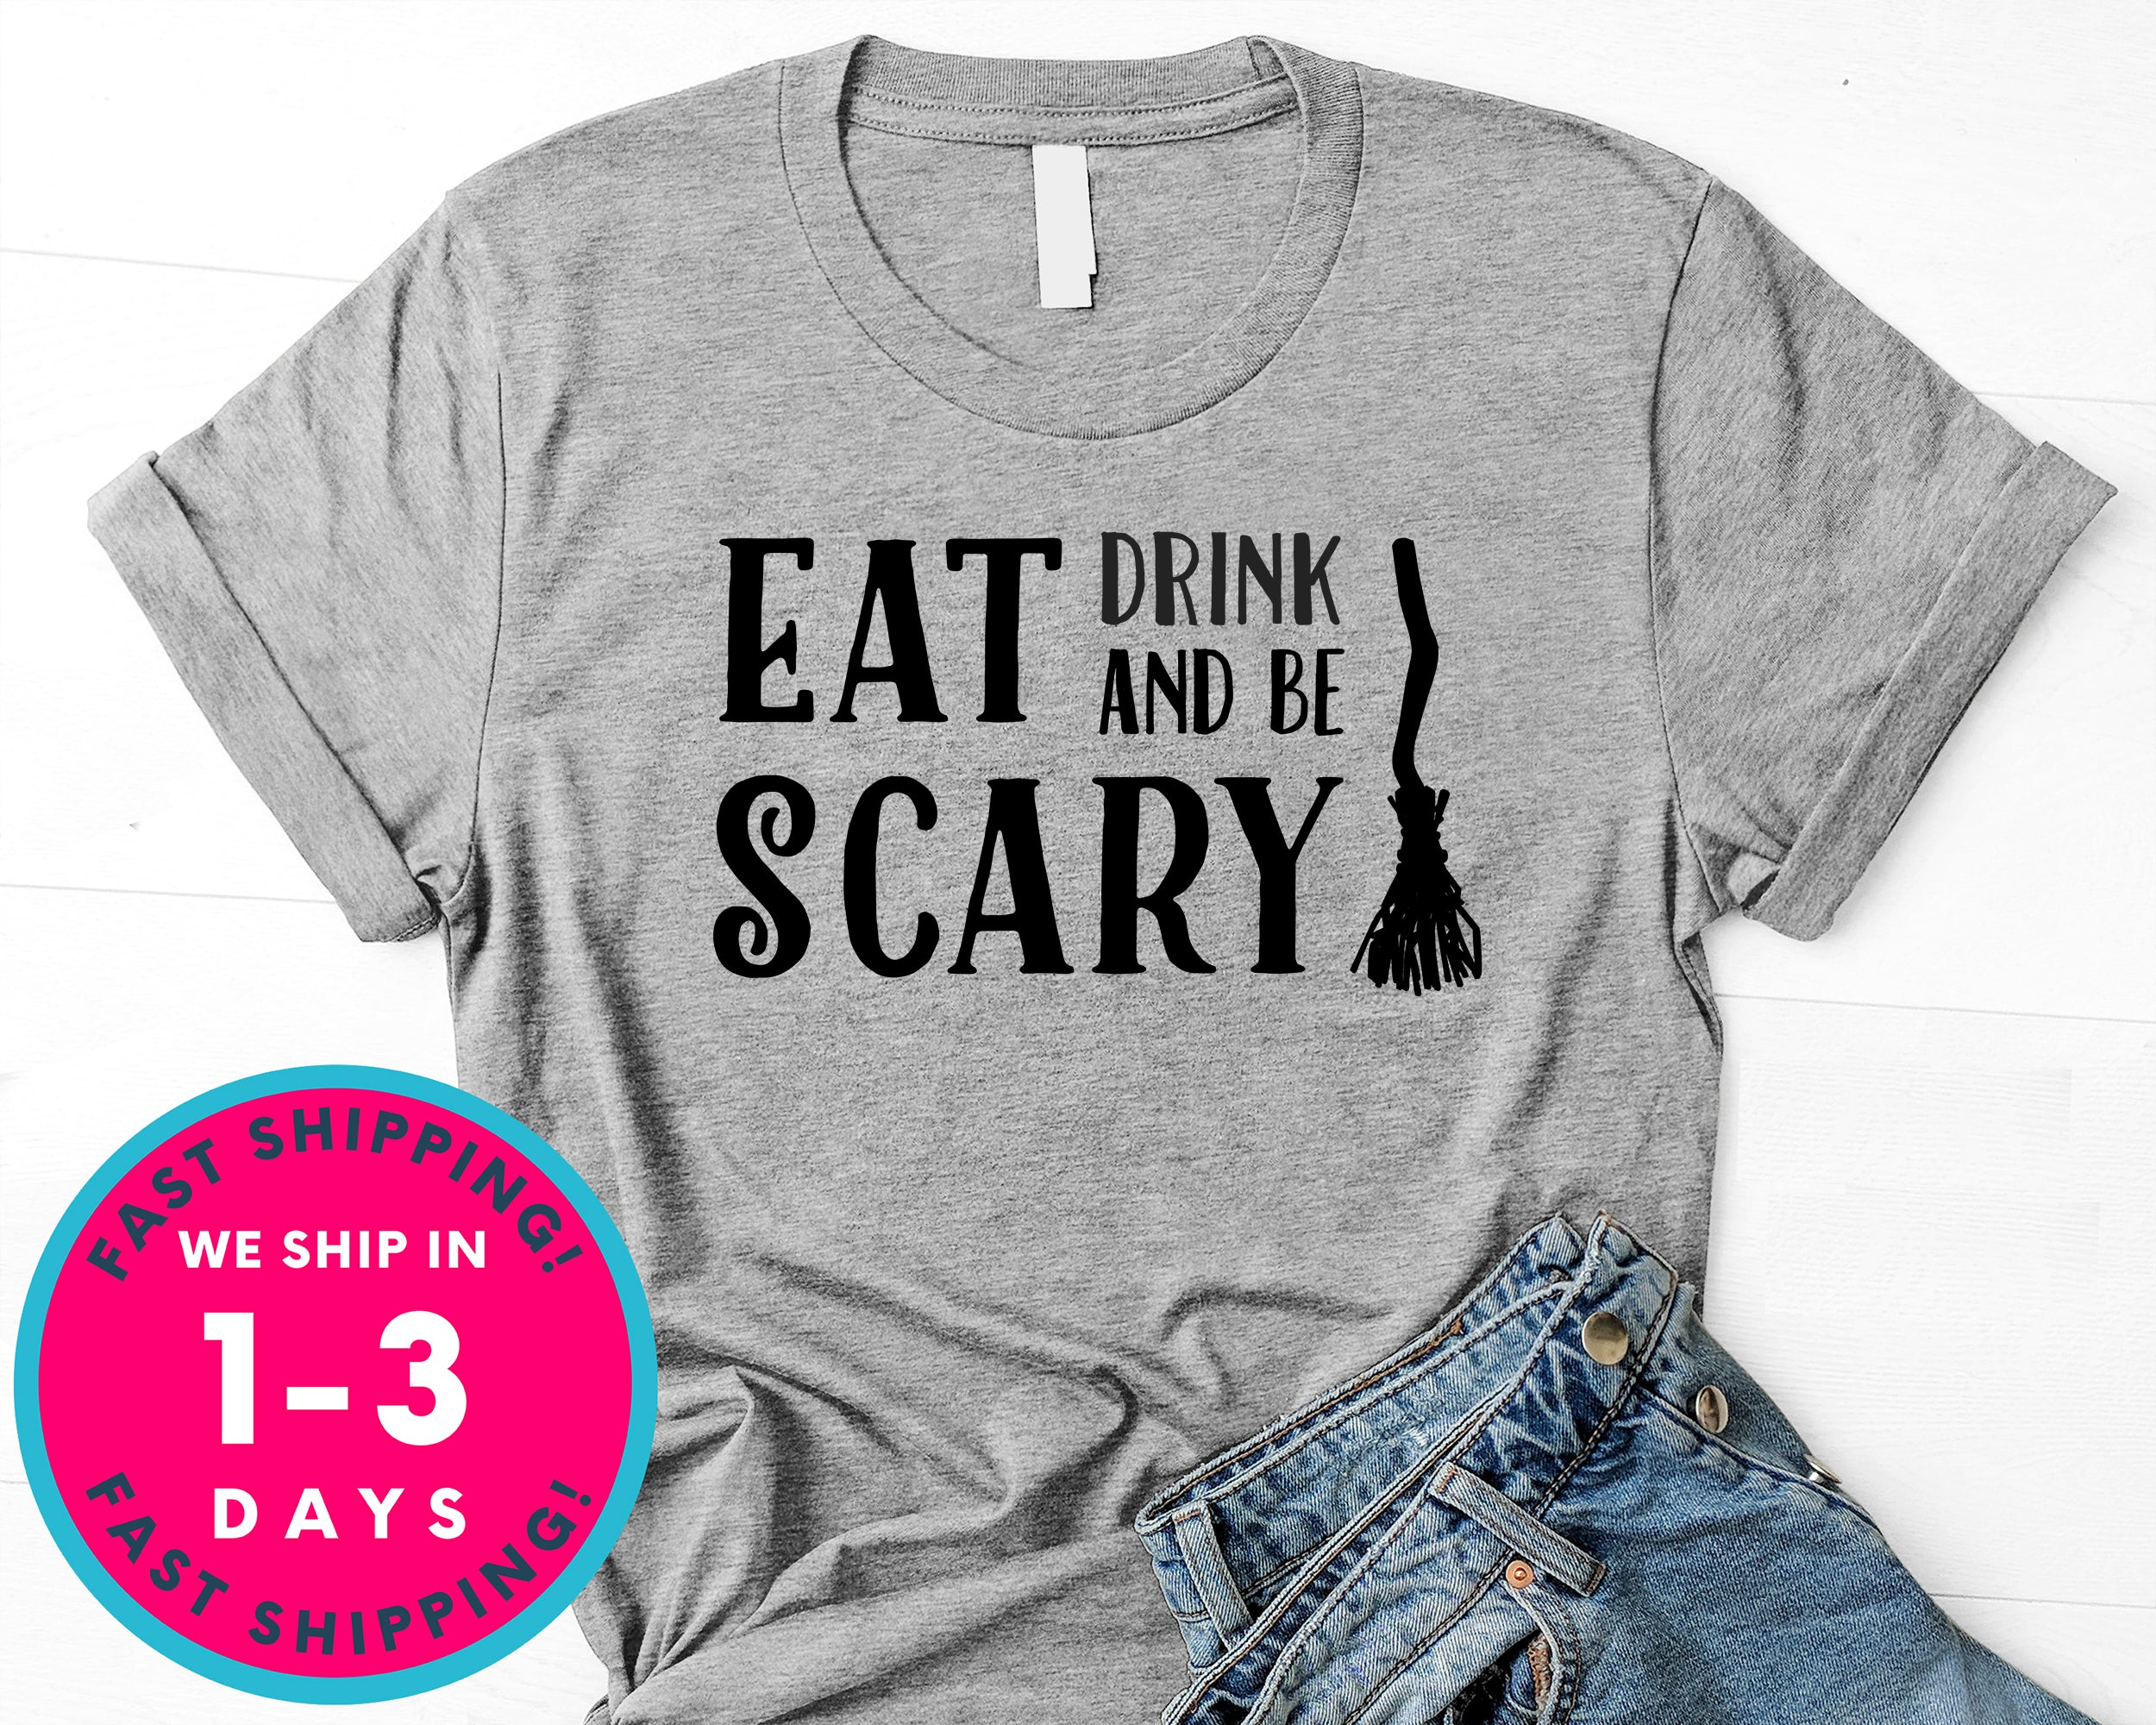 Eat Drink And Be Scary T-Shirt - Halloween Horror Scary Shirt